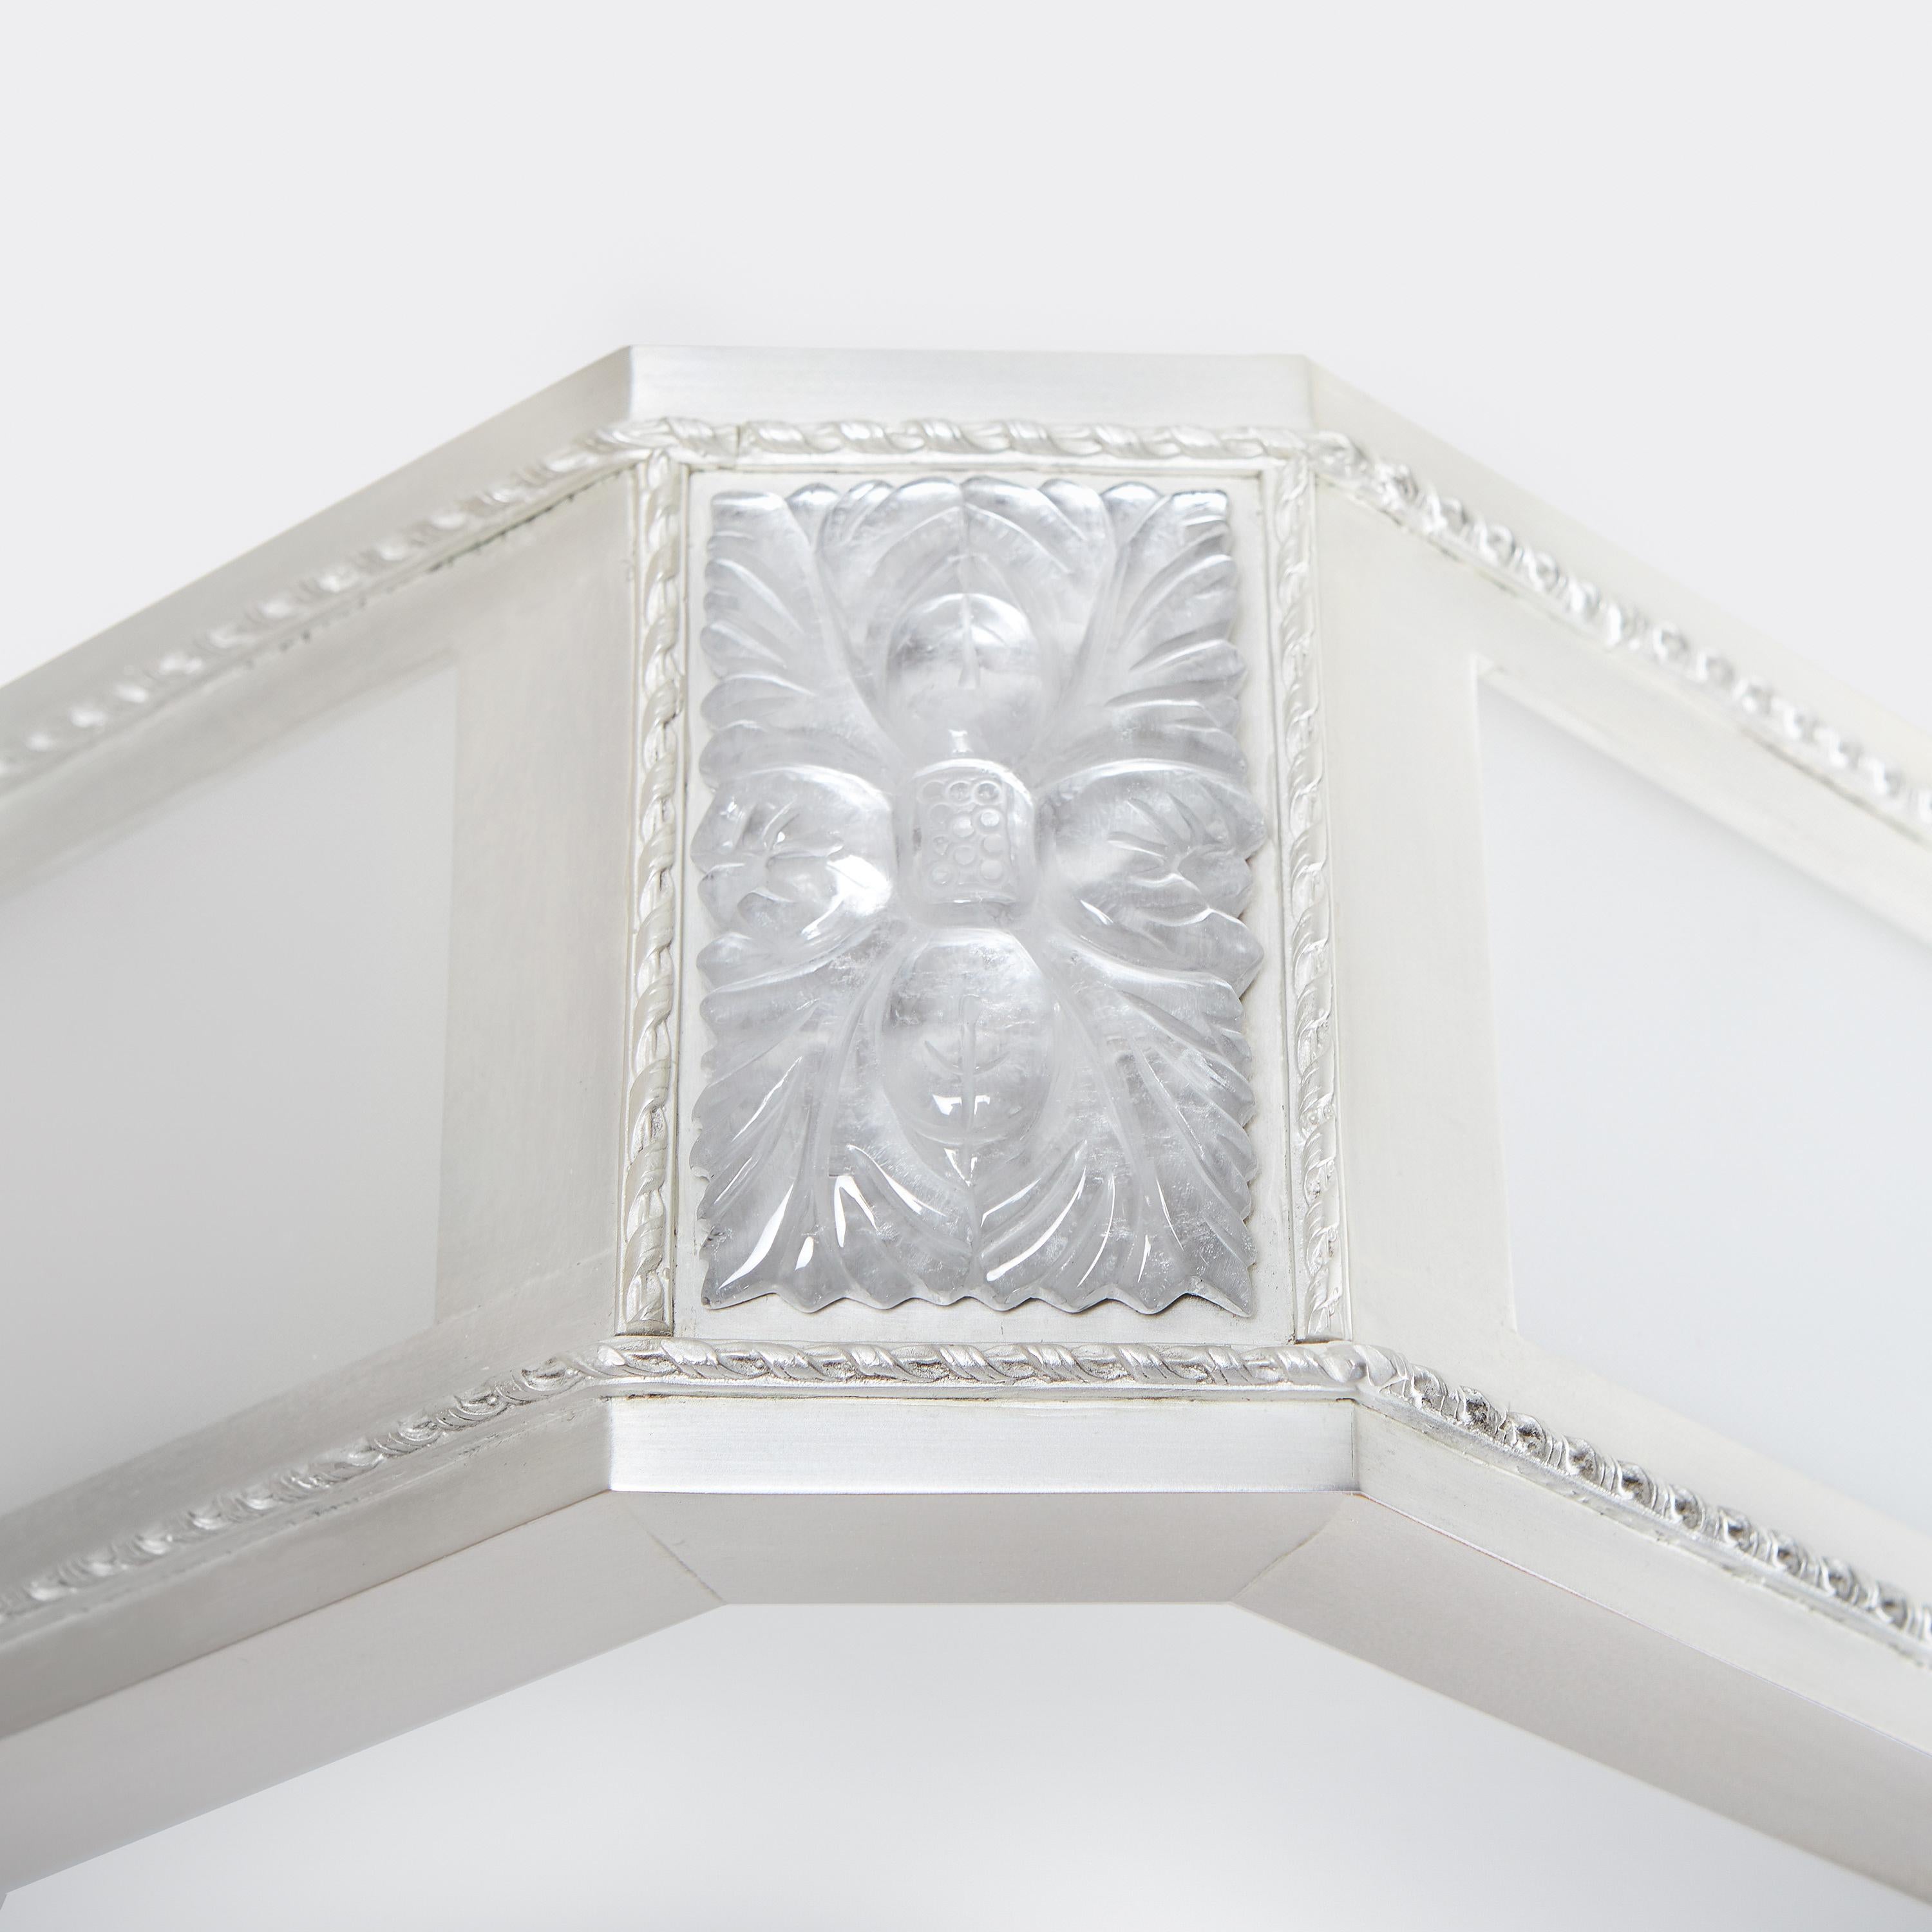 A rectangular pendant version of David Duncan's Victoire design. The frame having frosted low iron glass in four sections, separated by rectangular rock crystal rosettes on the corners. Suspended from rods and canopy, with frosted low iron glass